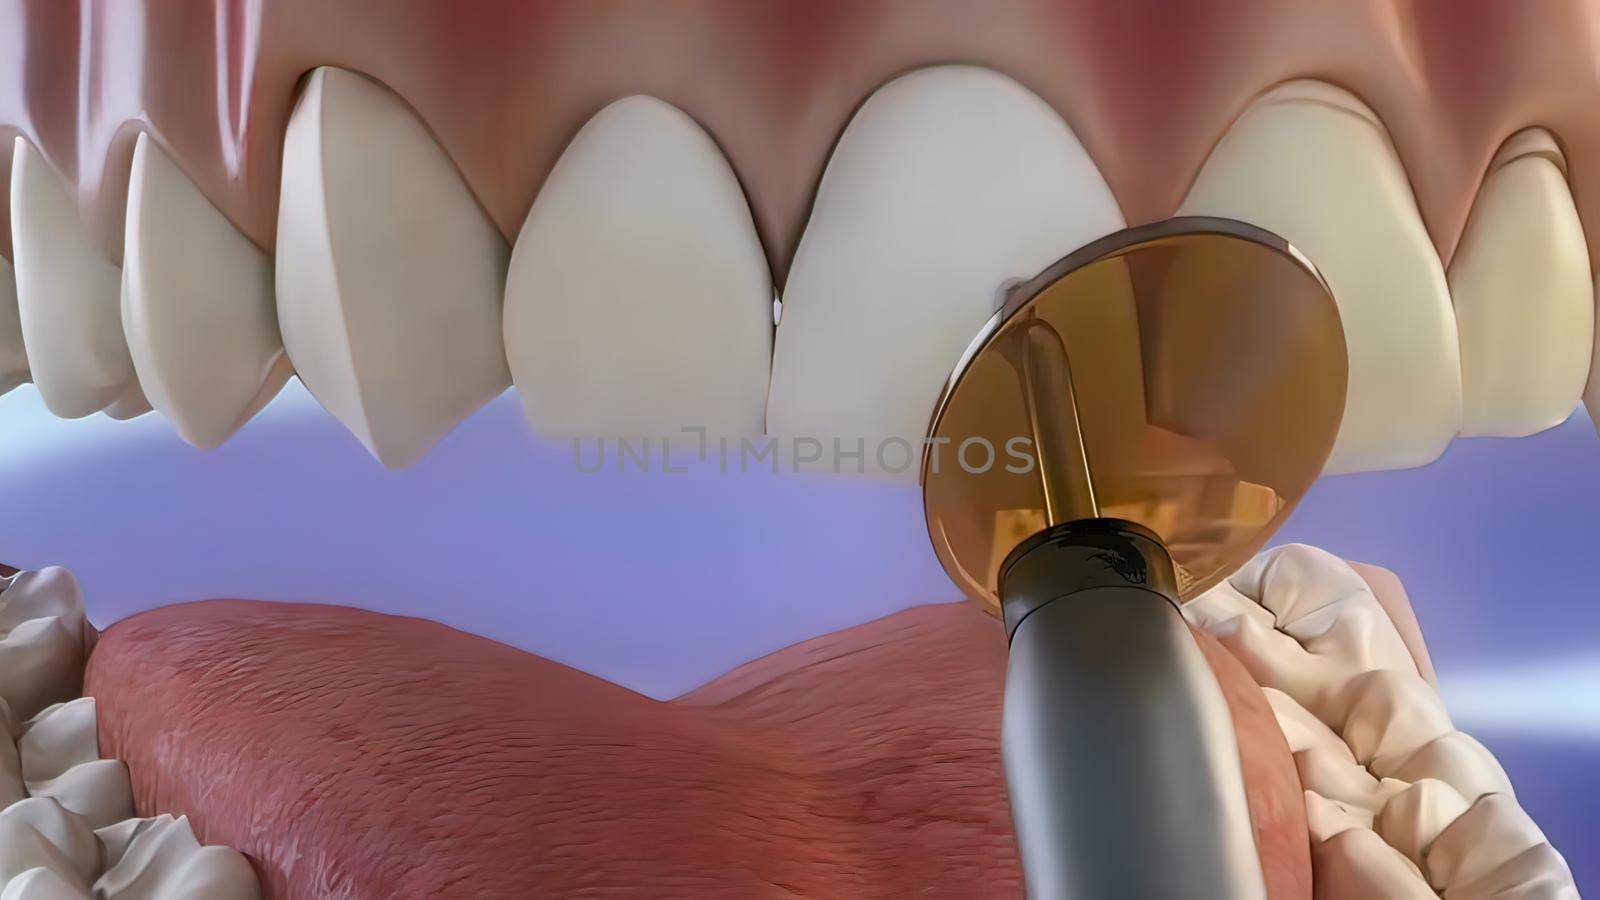 Tooth coating process, drying with adhesive beam by creativepic